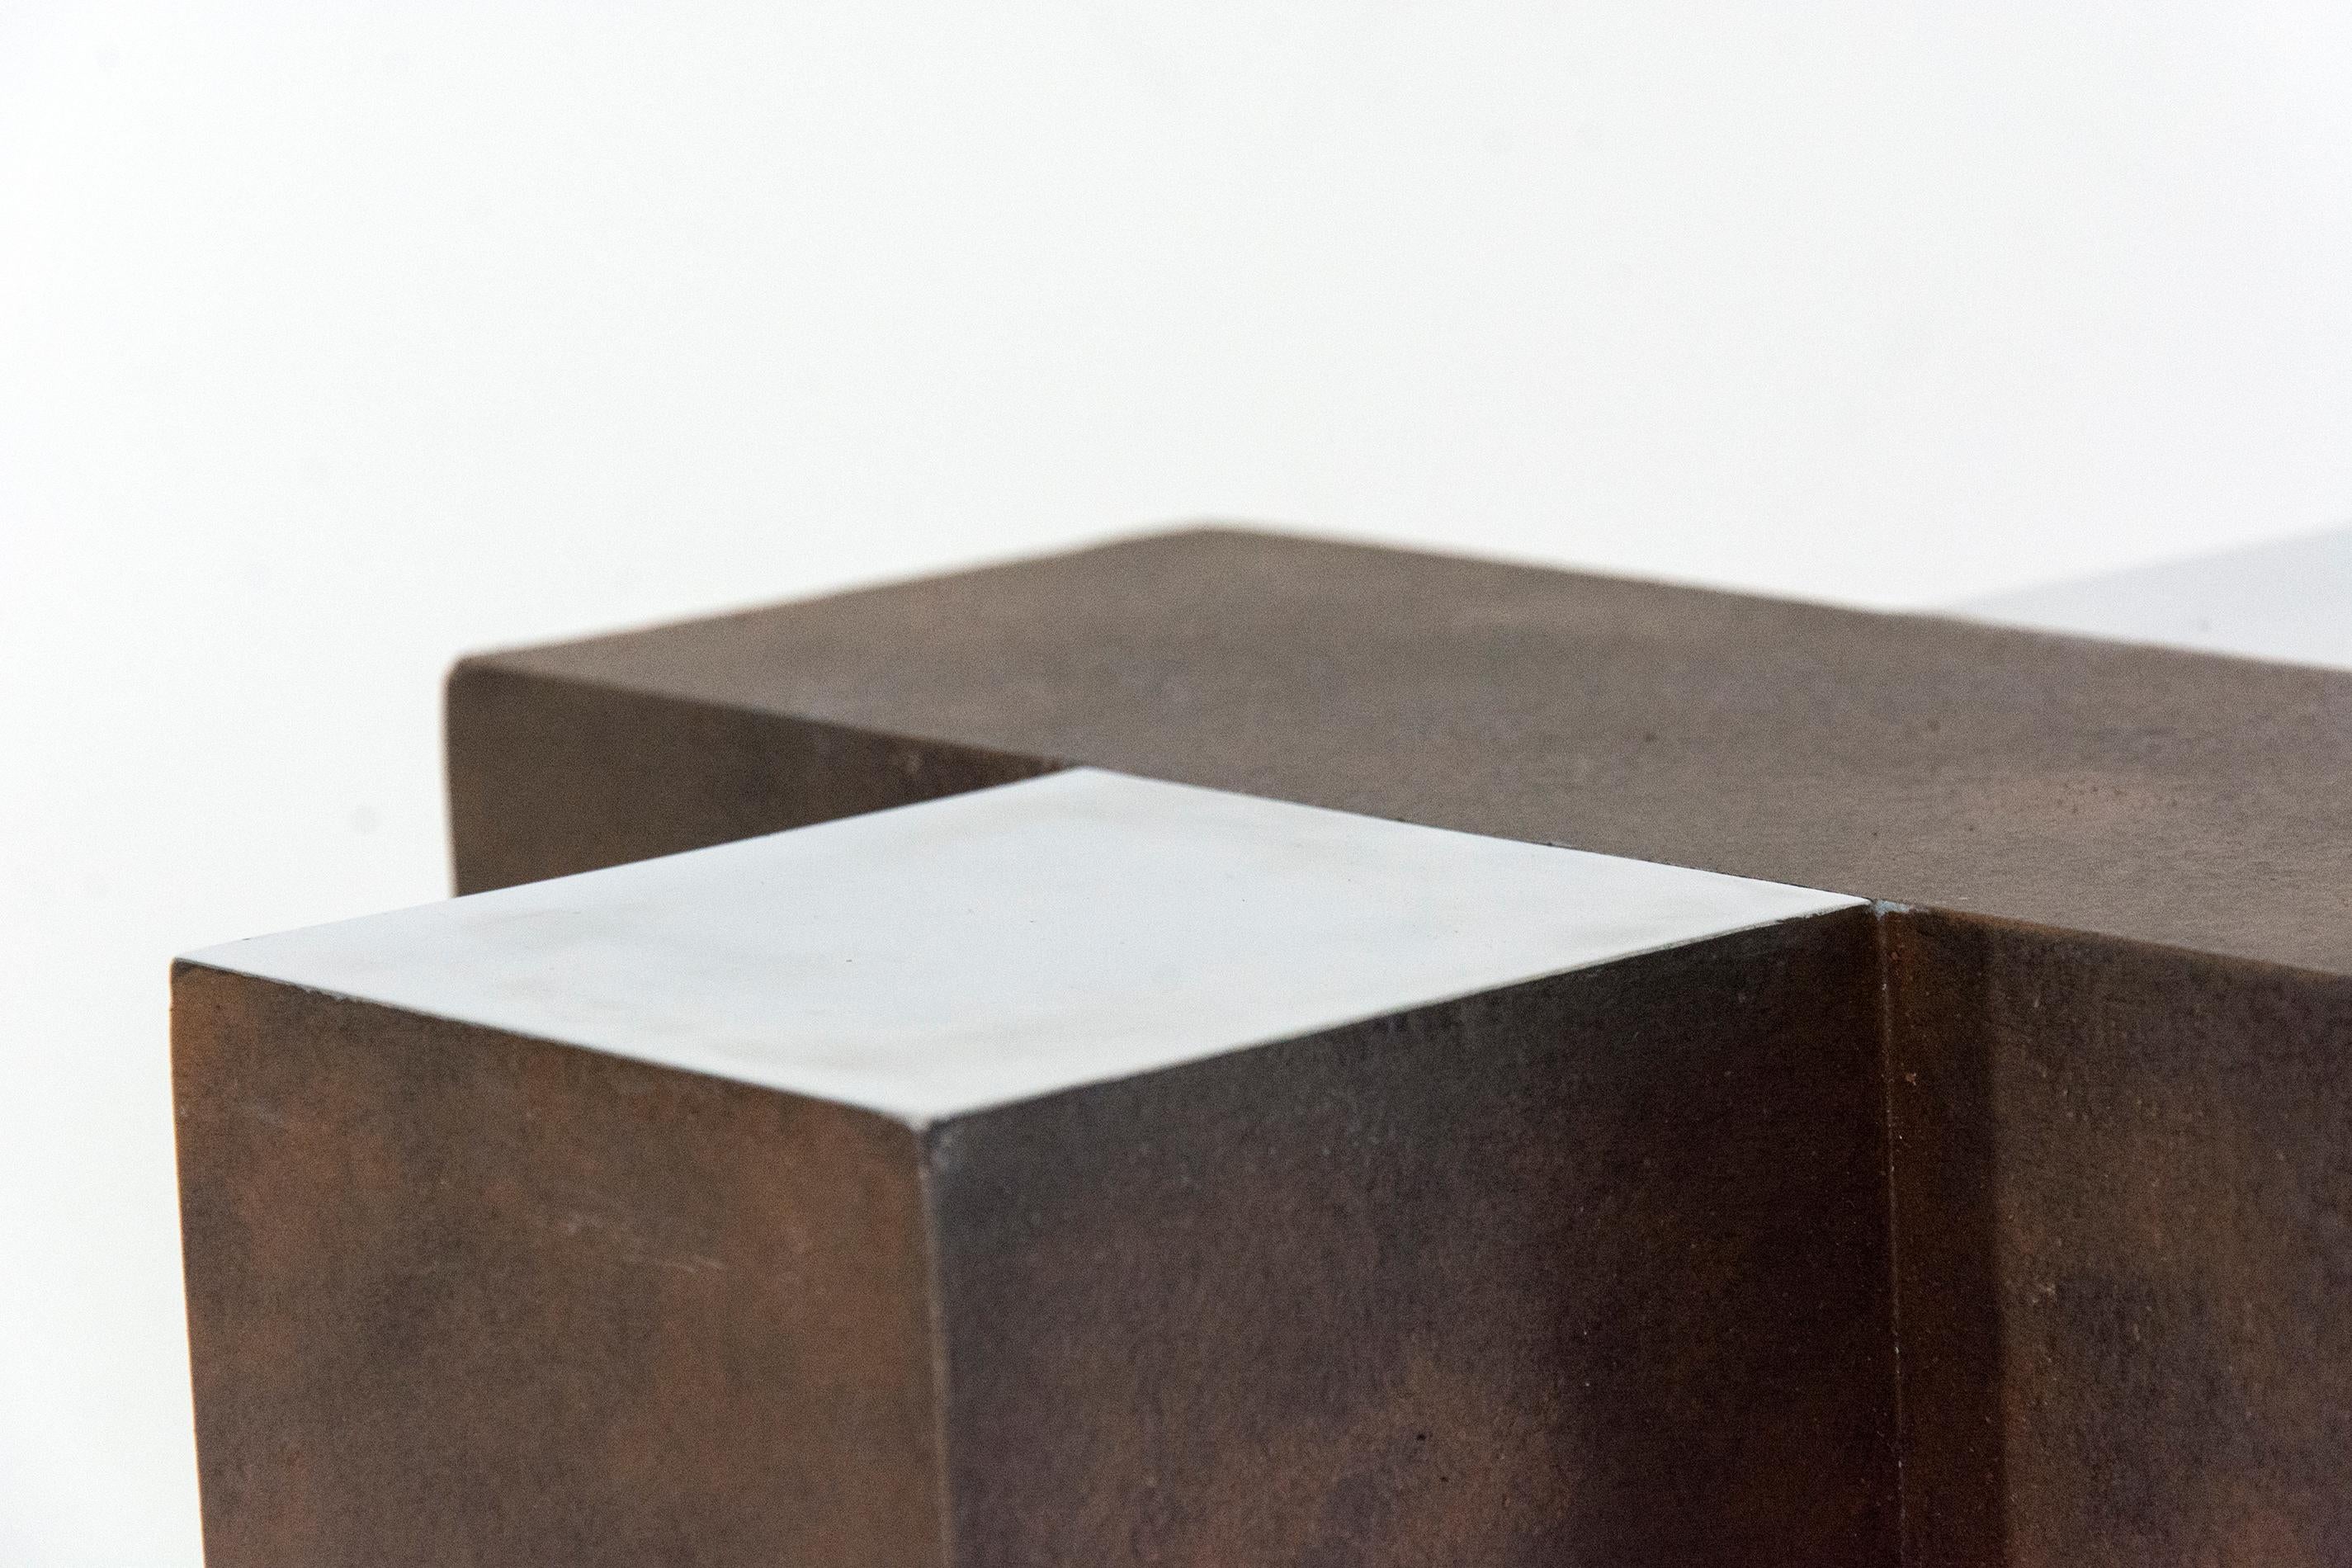 Intersecting geometry in a rust-brown patina and polished aluminum form a dynamic whole in this modern sculpture by Philippe Pallafray. This piece is number 2 in an edition of 10. It is available by commision, please allow 4-5 weeks for